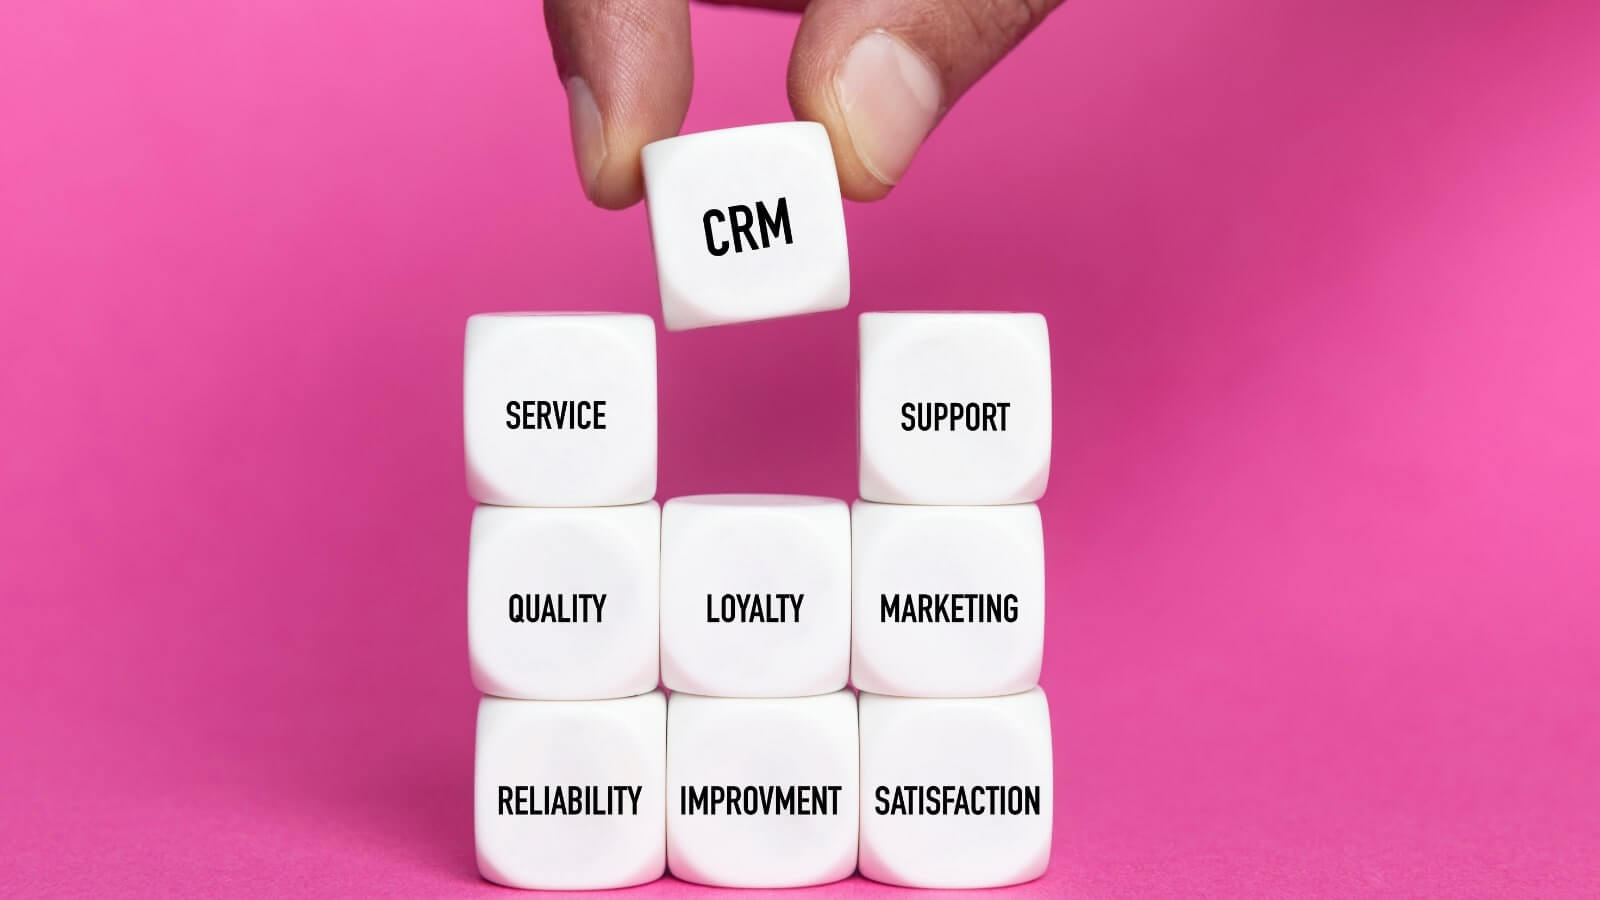 Top 7 Benefits of CRM Systems for Businesses